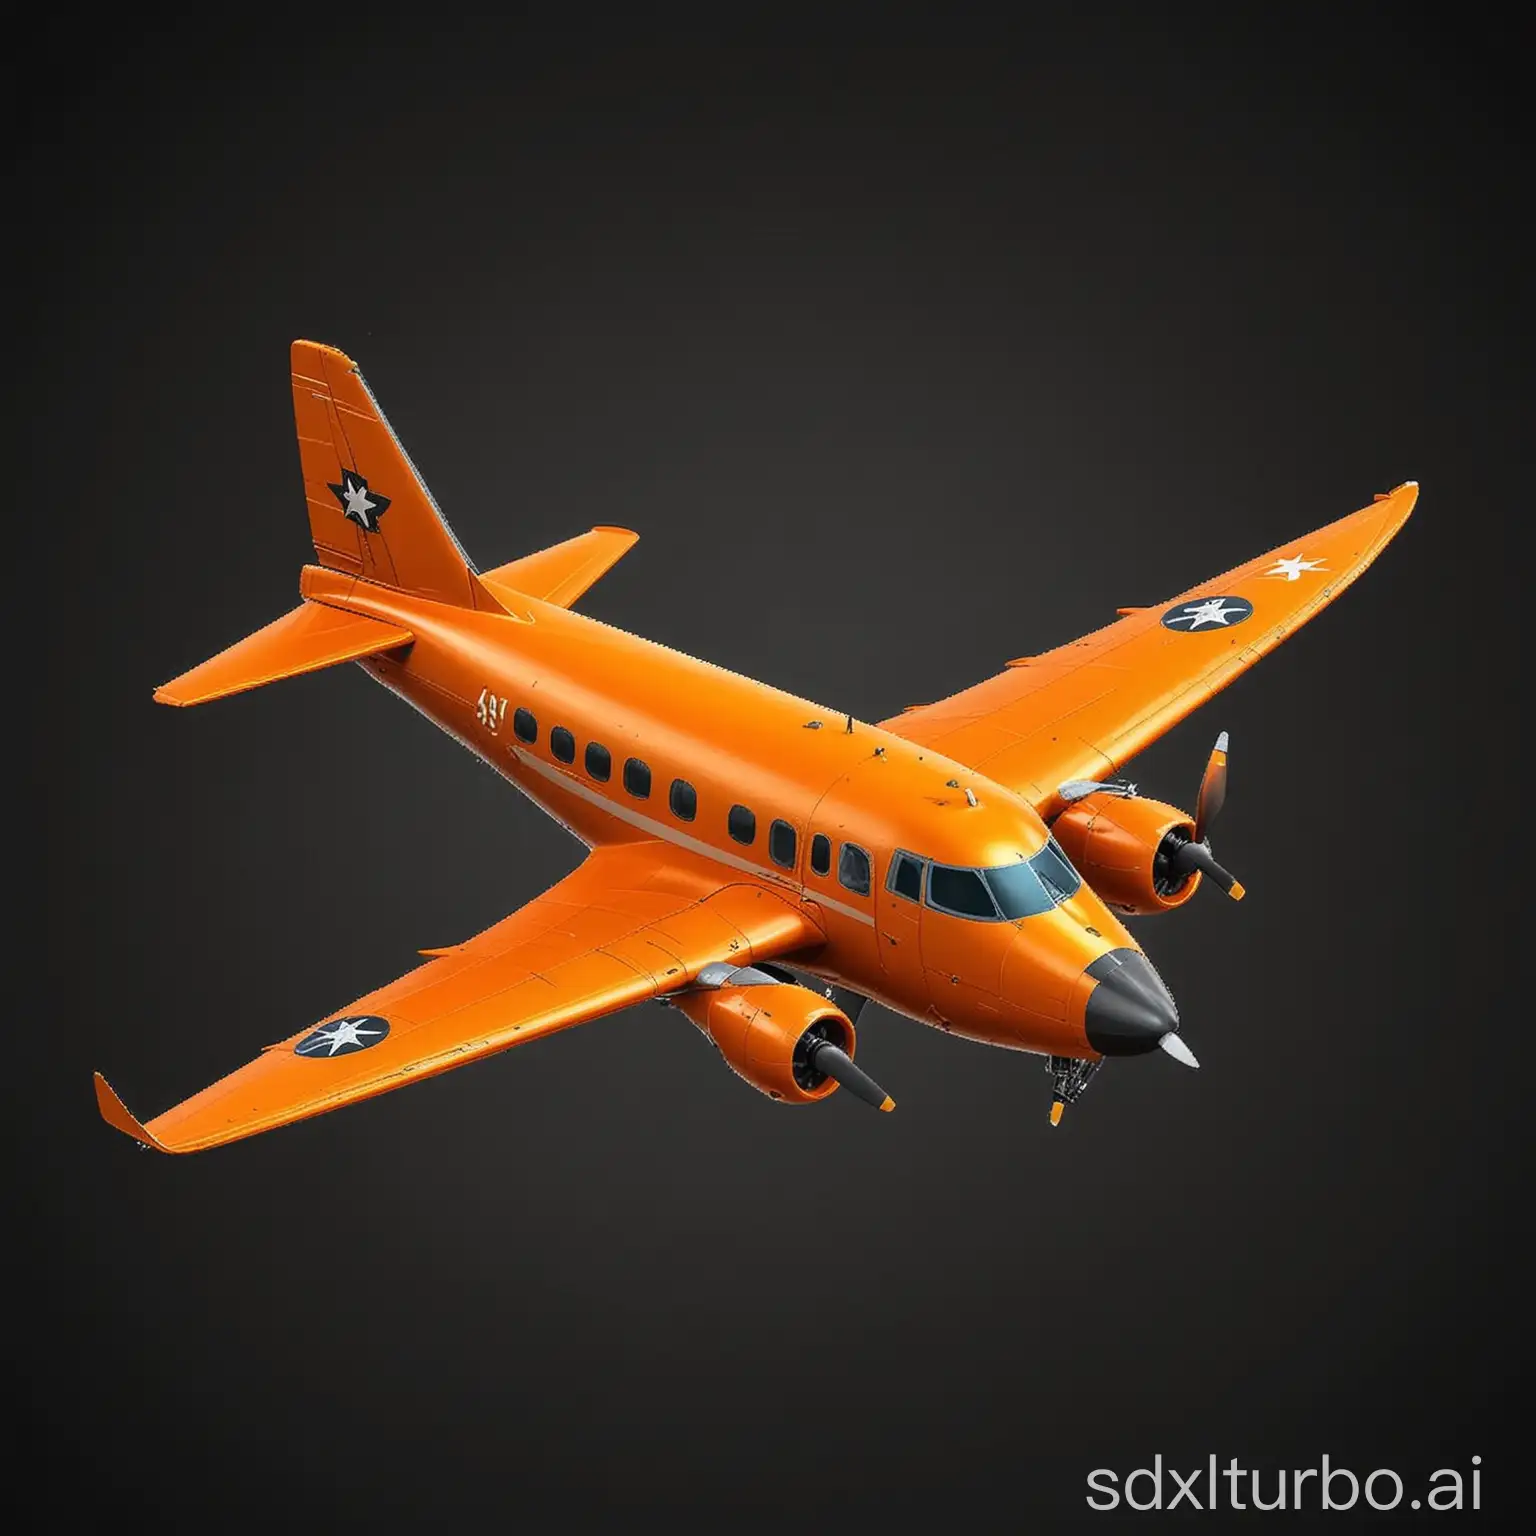 Create an image about an orange color airplane cartoon style isolated on black background, game art style